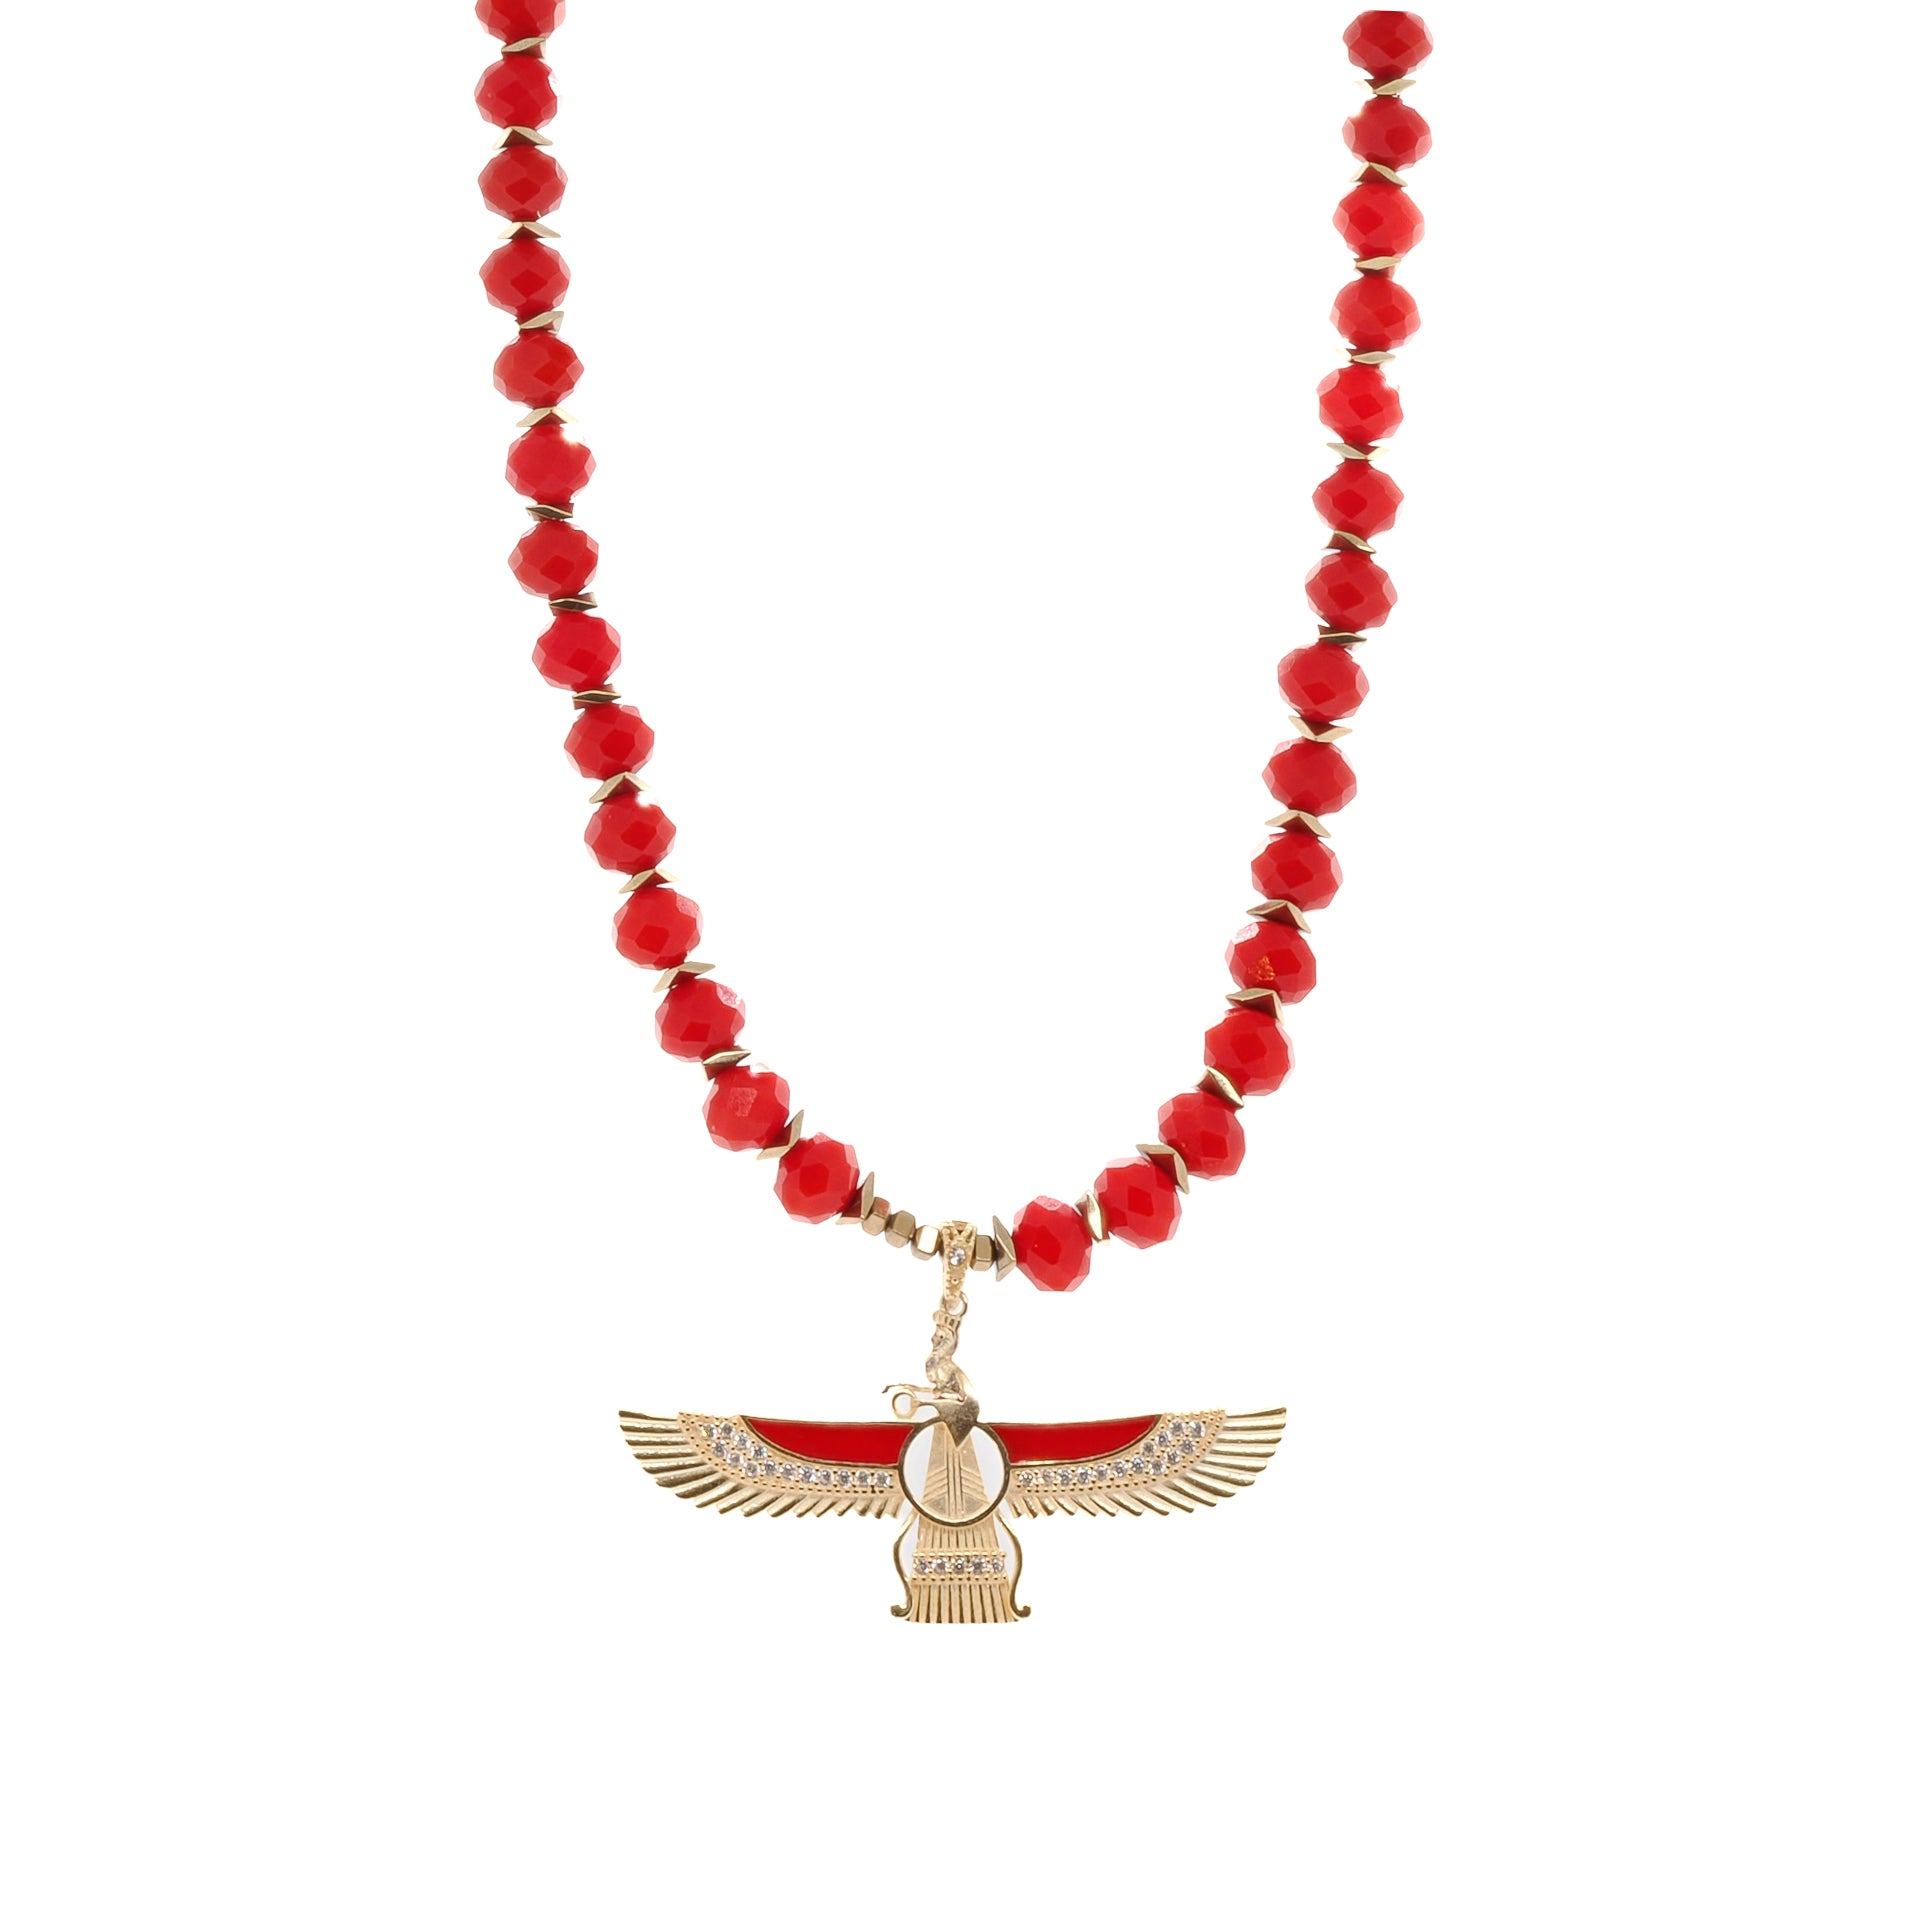 Ancient Symbol, Modern Style - The Red Crystal Faravahar Necklace Adds a Touch of Elegance.